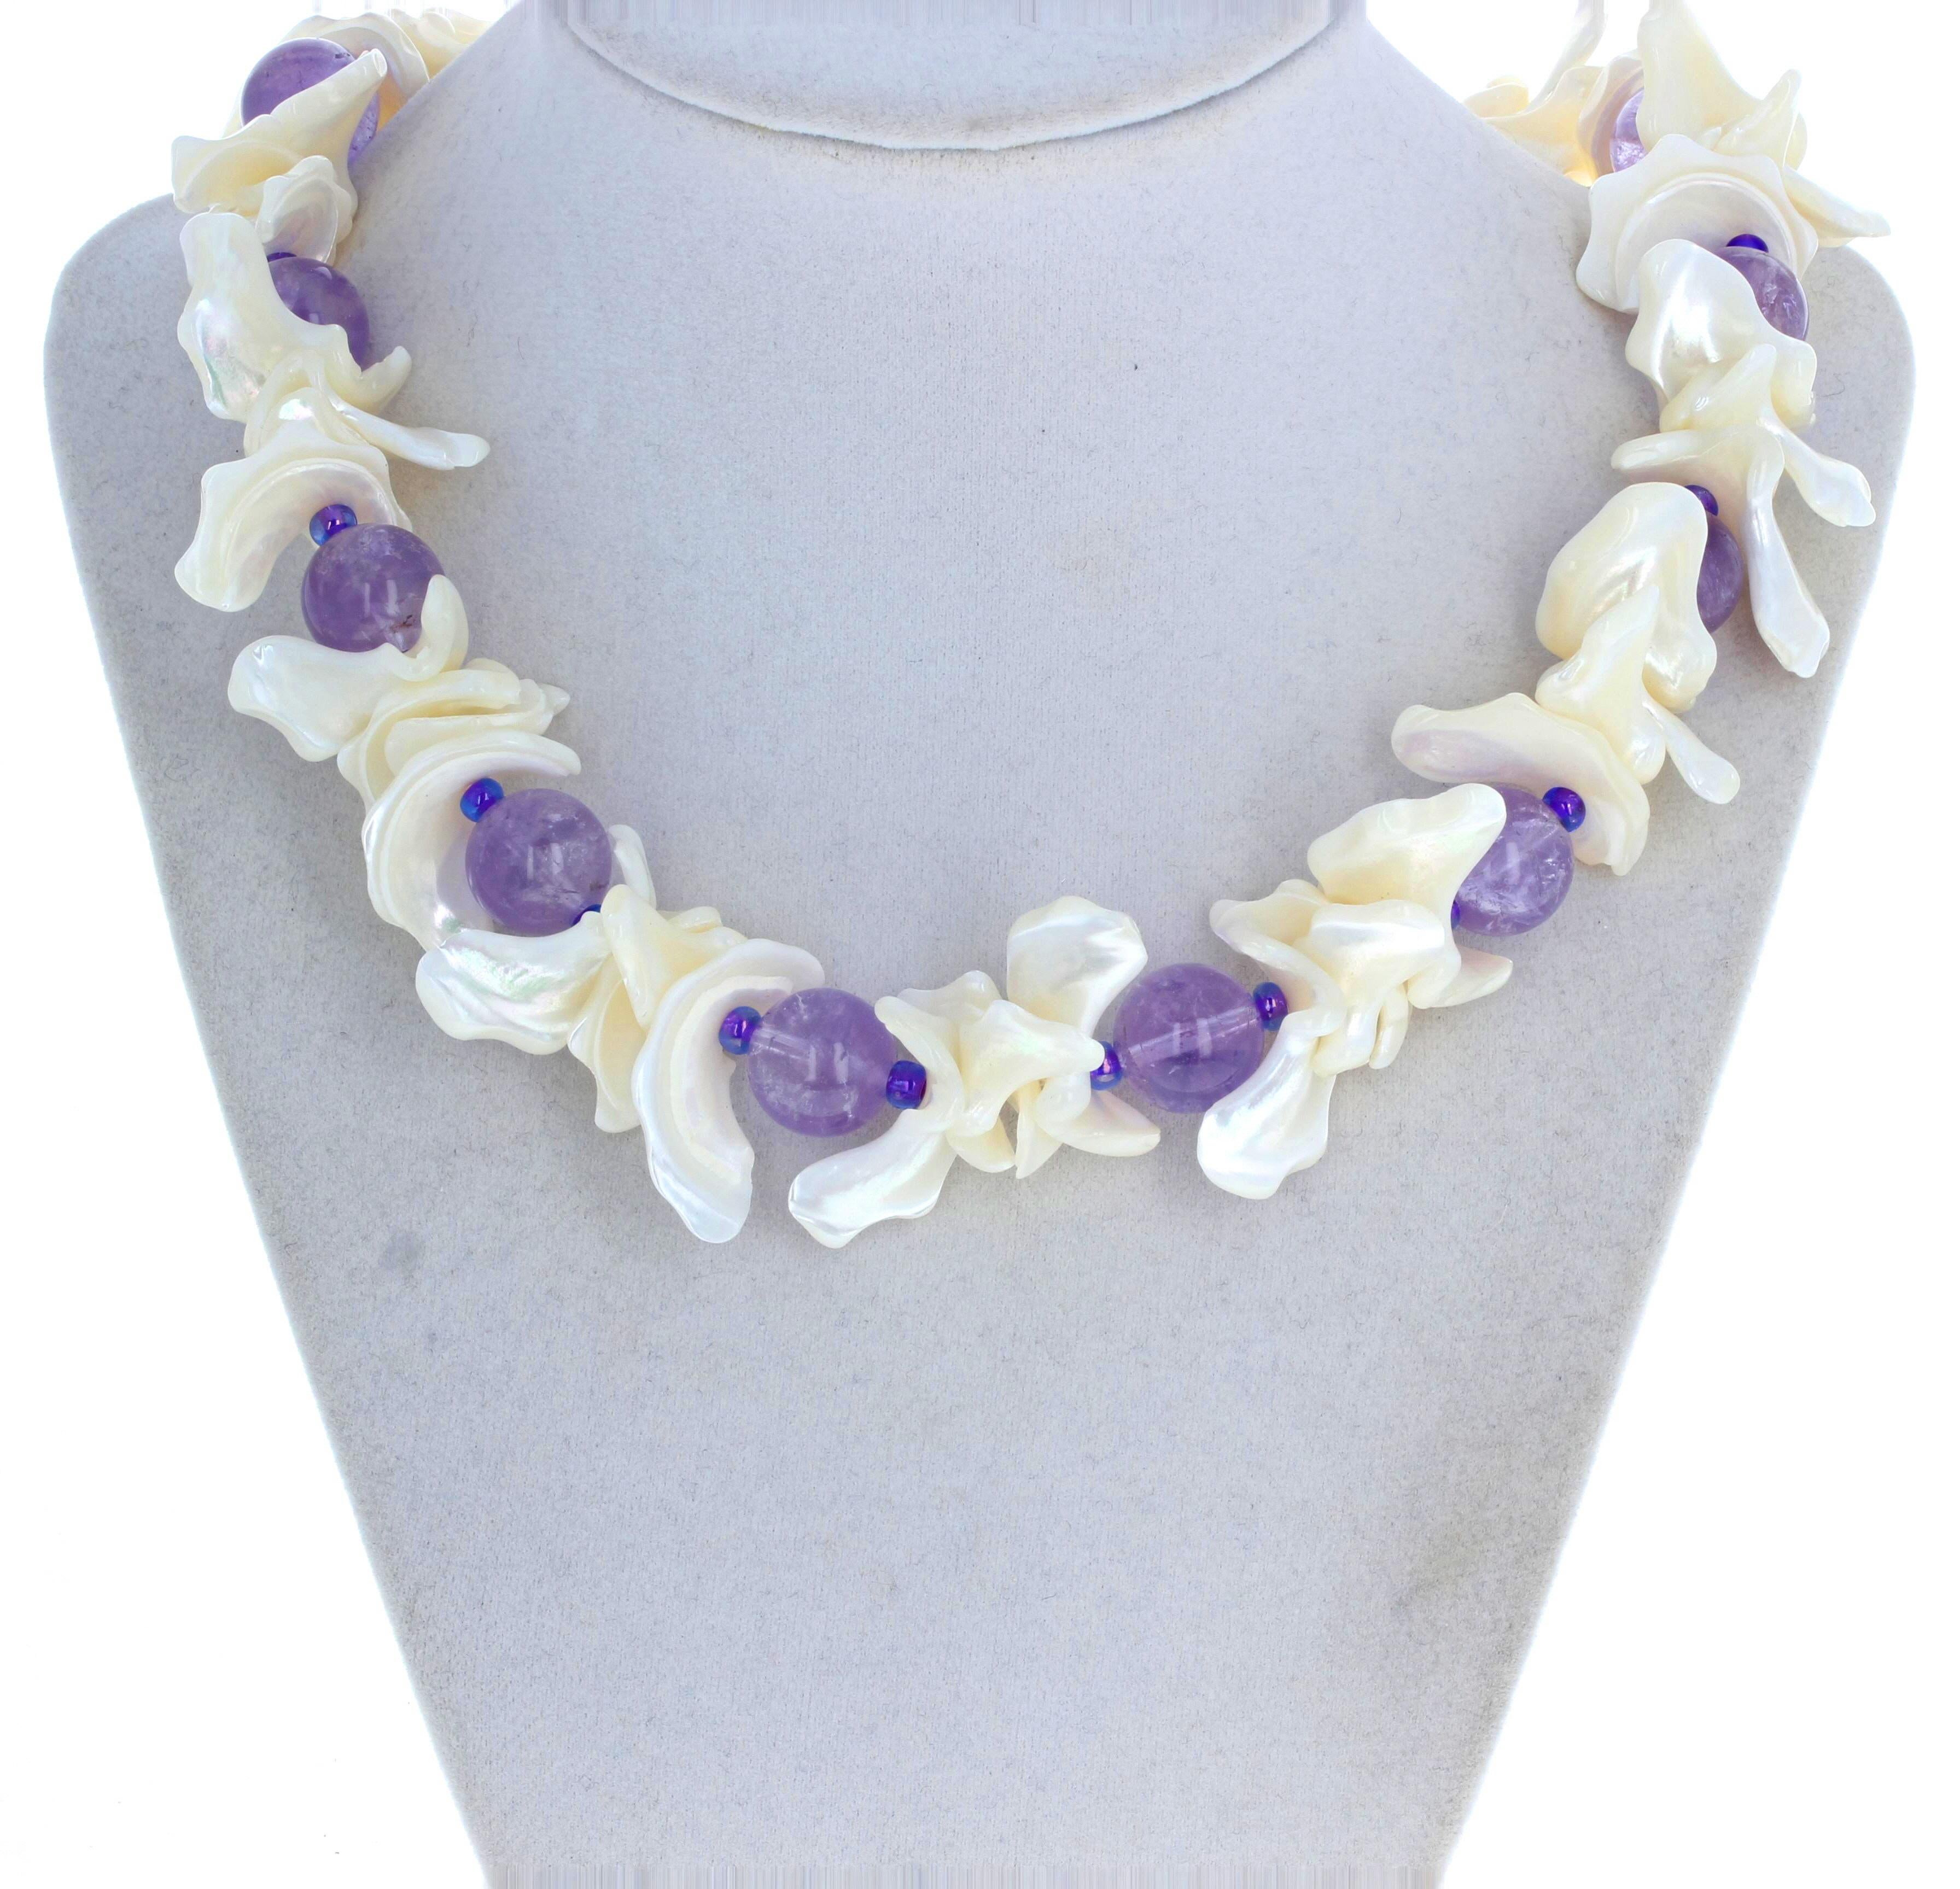 These lovely cut and polished round natural real Amethyst gemstones  - approximately 13mm - adorn the beautiful highly polished and glowing natural white Pearl shells. There are no sharp edges on these Pearl Shells.  This necklace is 18 inches long